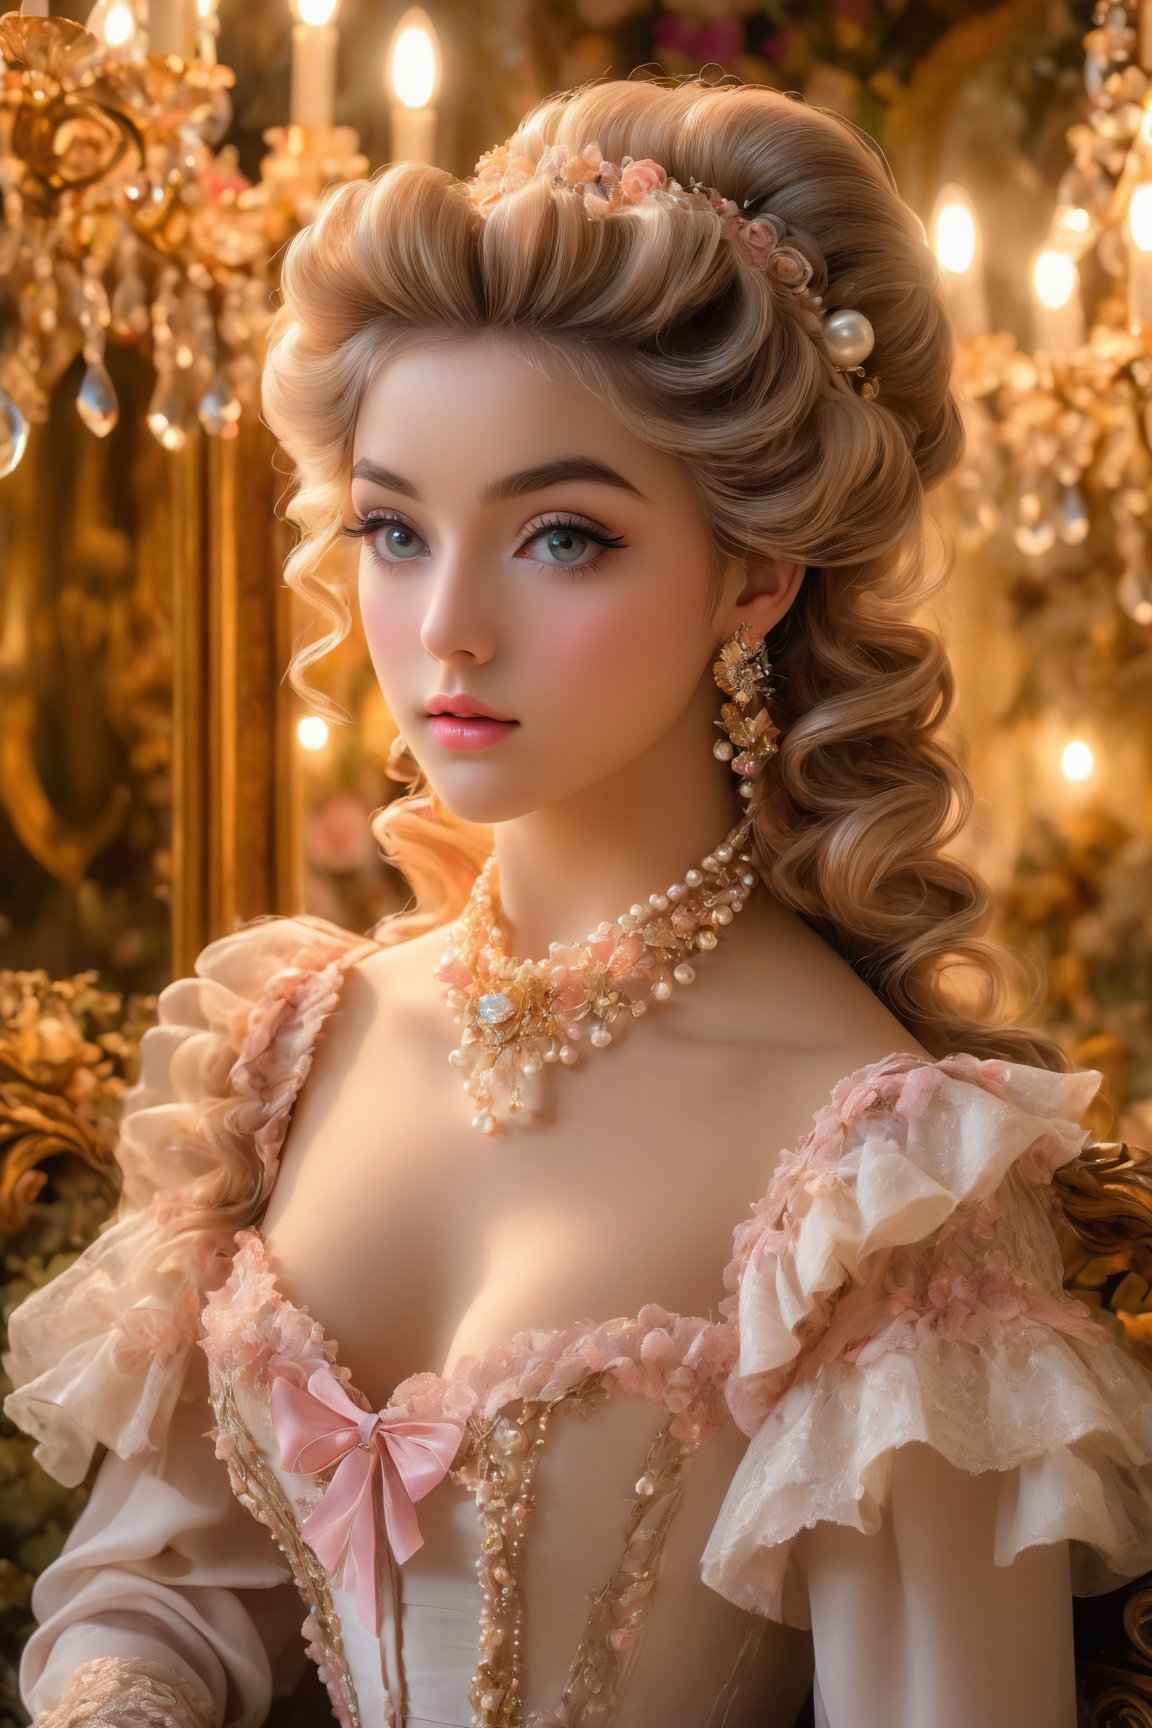 (best quality,4k,8k,highres,masterpiece:1.2),ultra-detailed,(realistic,photorealistic,photo-realistic:1.37),anime artwork,rococo,annoyed girl,beautiful detailed eyes,beautiful detailed lips,extremely detailed eyes and face,long eyelashes,neon glowing hair,neon light,flamboyant,pastel colors,curved lines,elaborate detail,flowing dress,frilly collar,pearls and lace,golden jewelry,ornate accessories,polished floor,sparkling chandelier,romantic atmosphere,vibrant background,gentle breeze,pensive expression,dramatic pose,sultry gaze,blushing cheeks,soft, dreamy lighting,whimsical floral patterns,elegance and grace,baroque furniture,intimate setting,artistic flair,enchanted garden scenery.